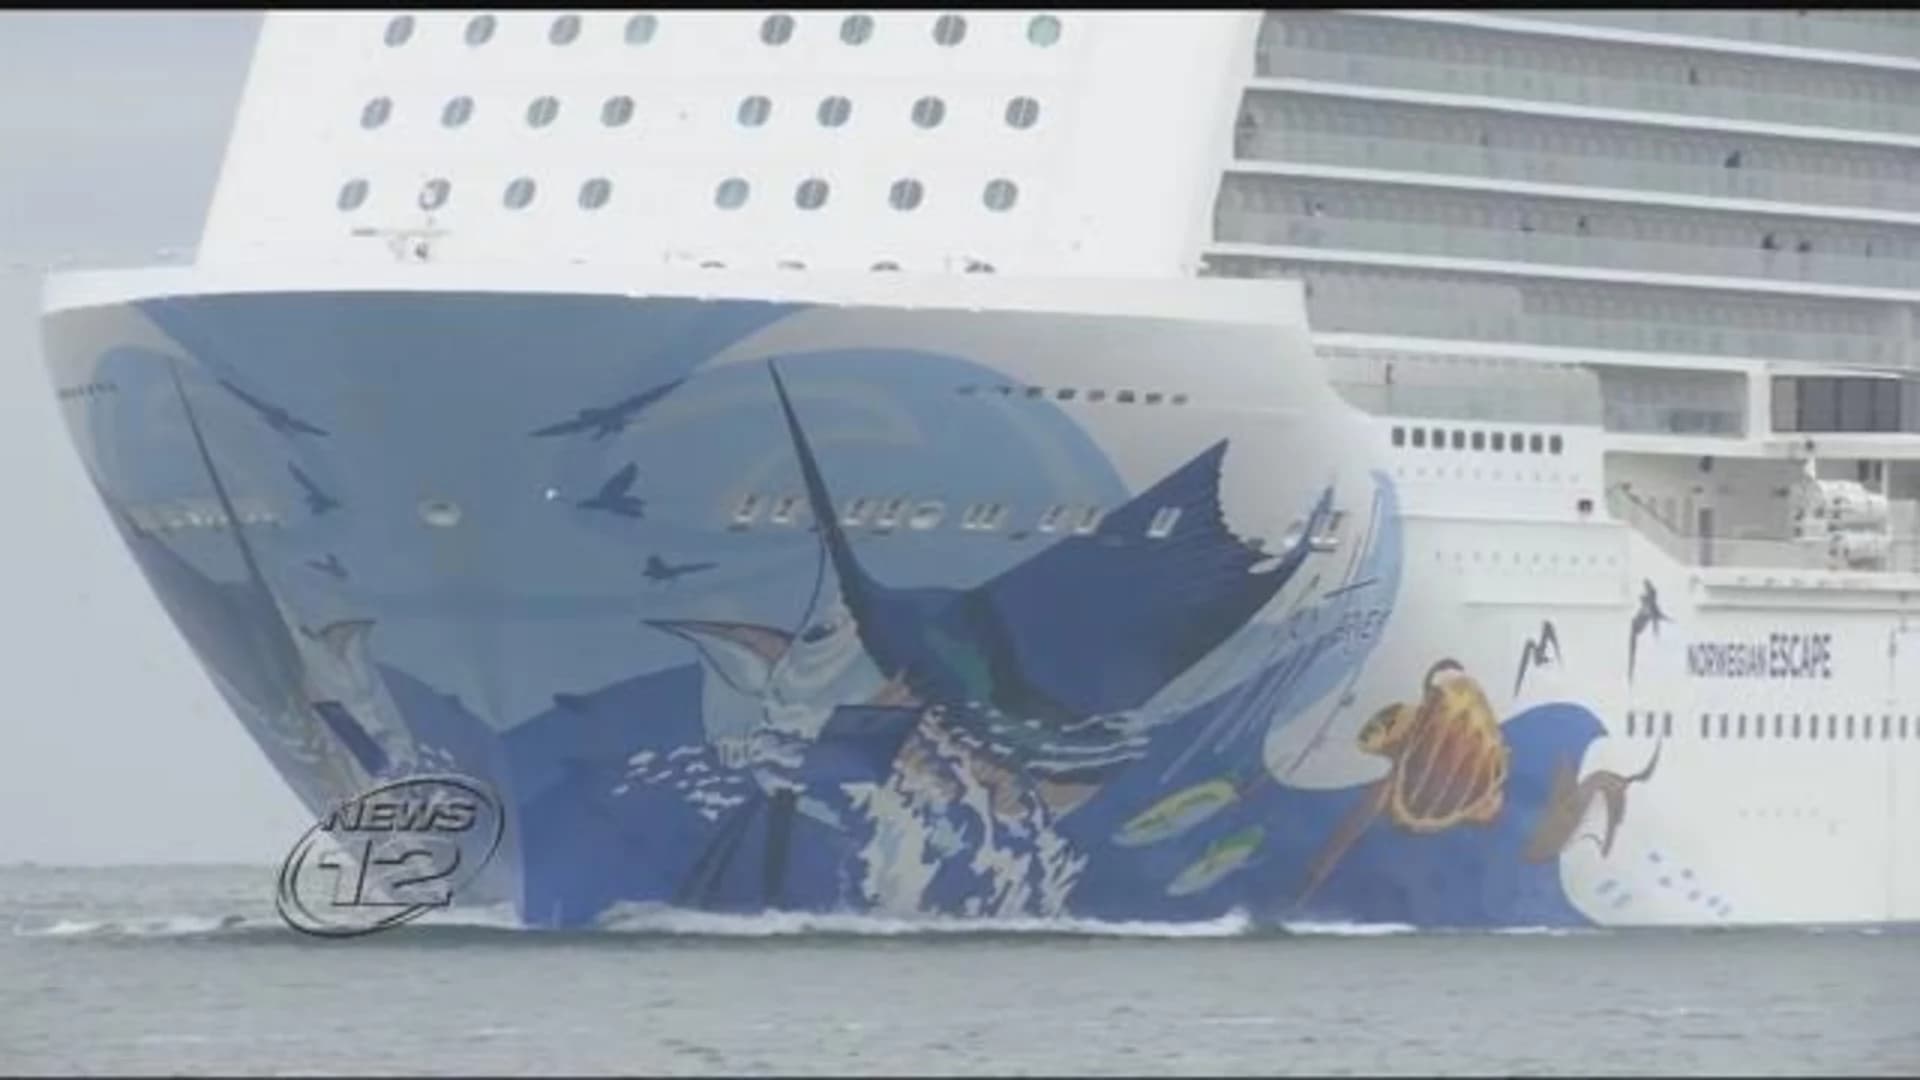 ‘Titanic was going through my mind:’ Family has rocky experience on cruise ship